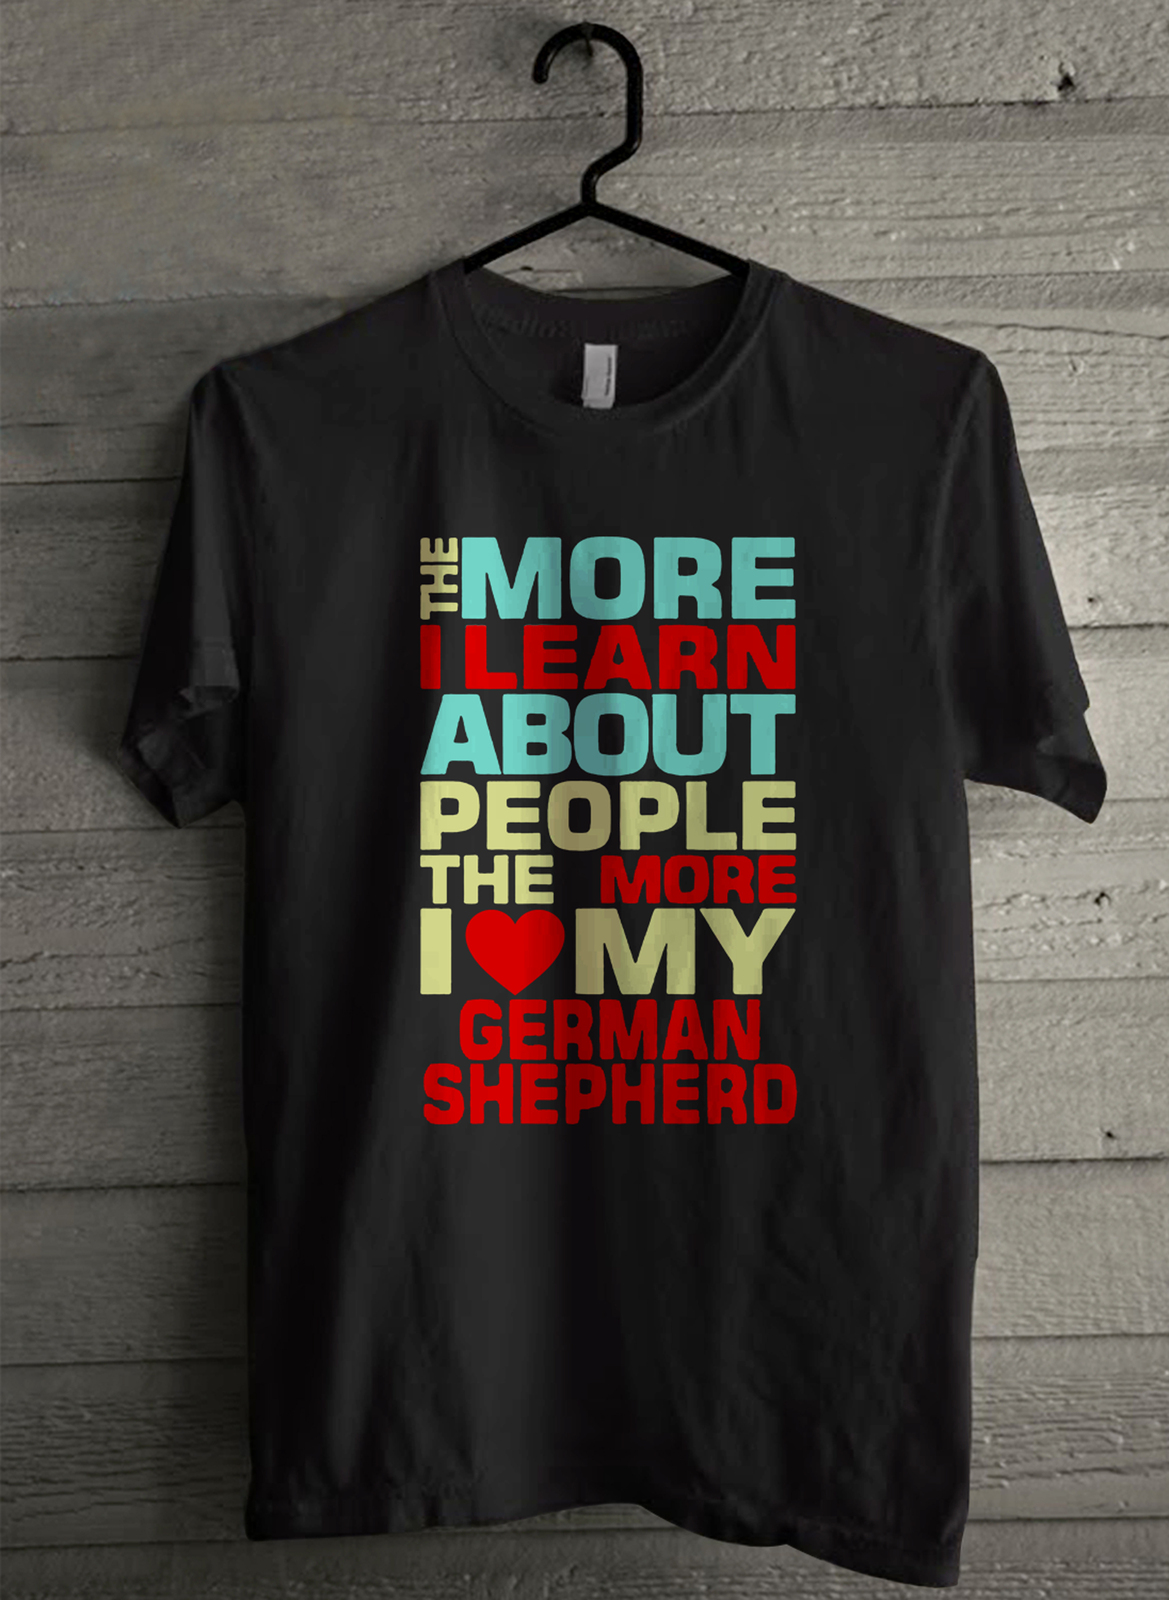 The More I Learn About People The More I Love Men's T-Shirt - Custom (4237) - $19.12 - $21.82